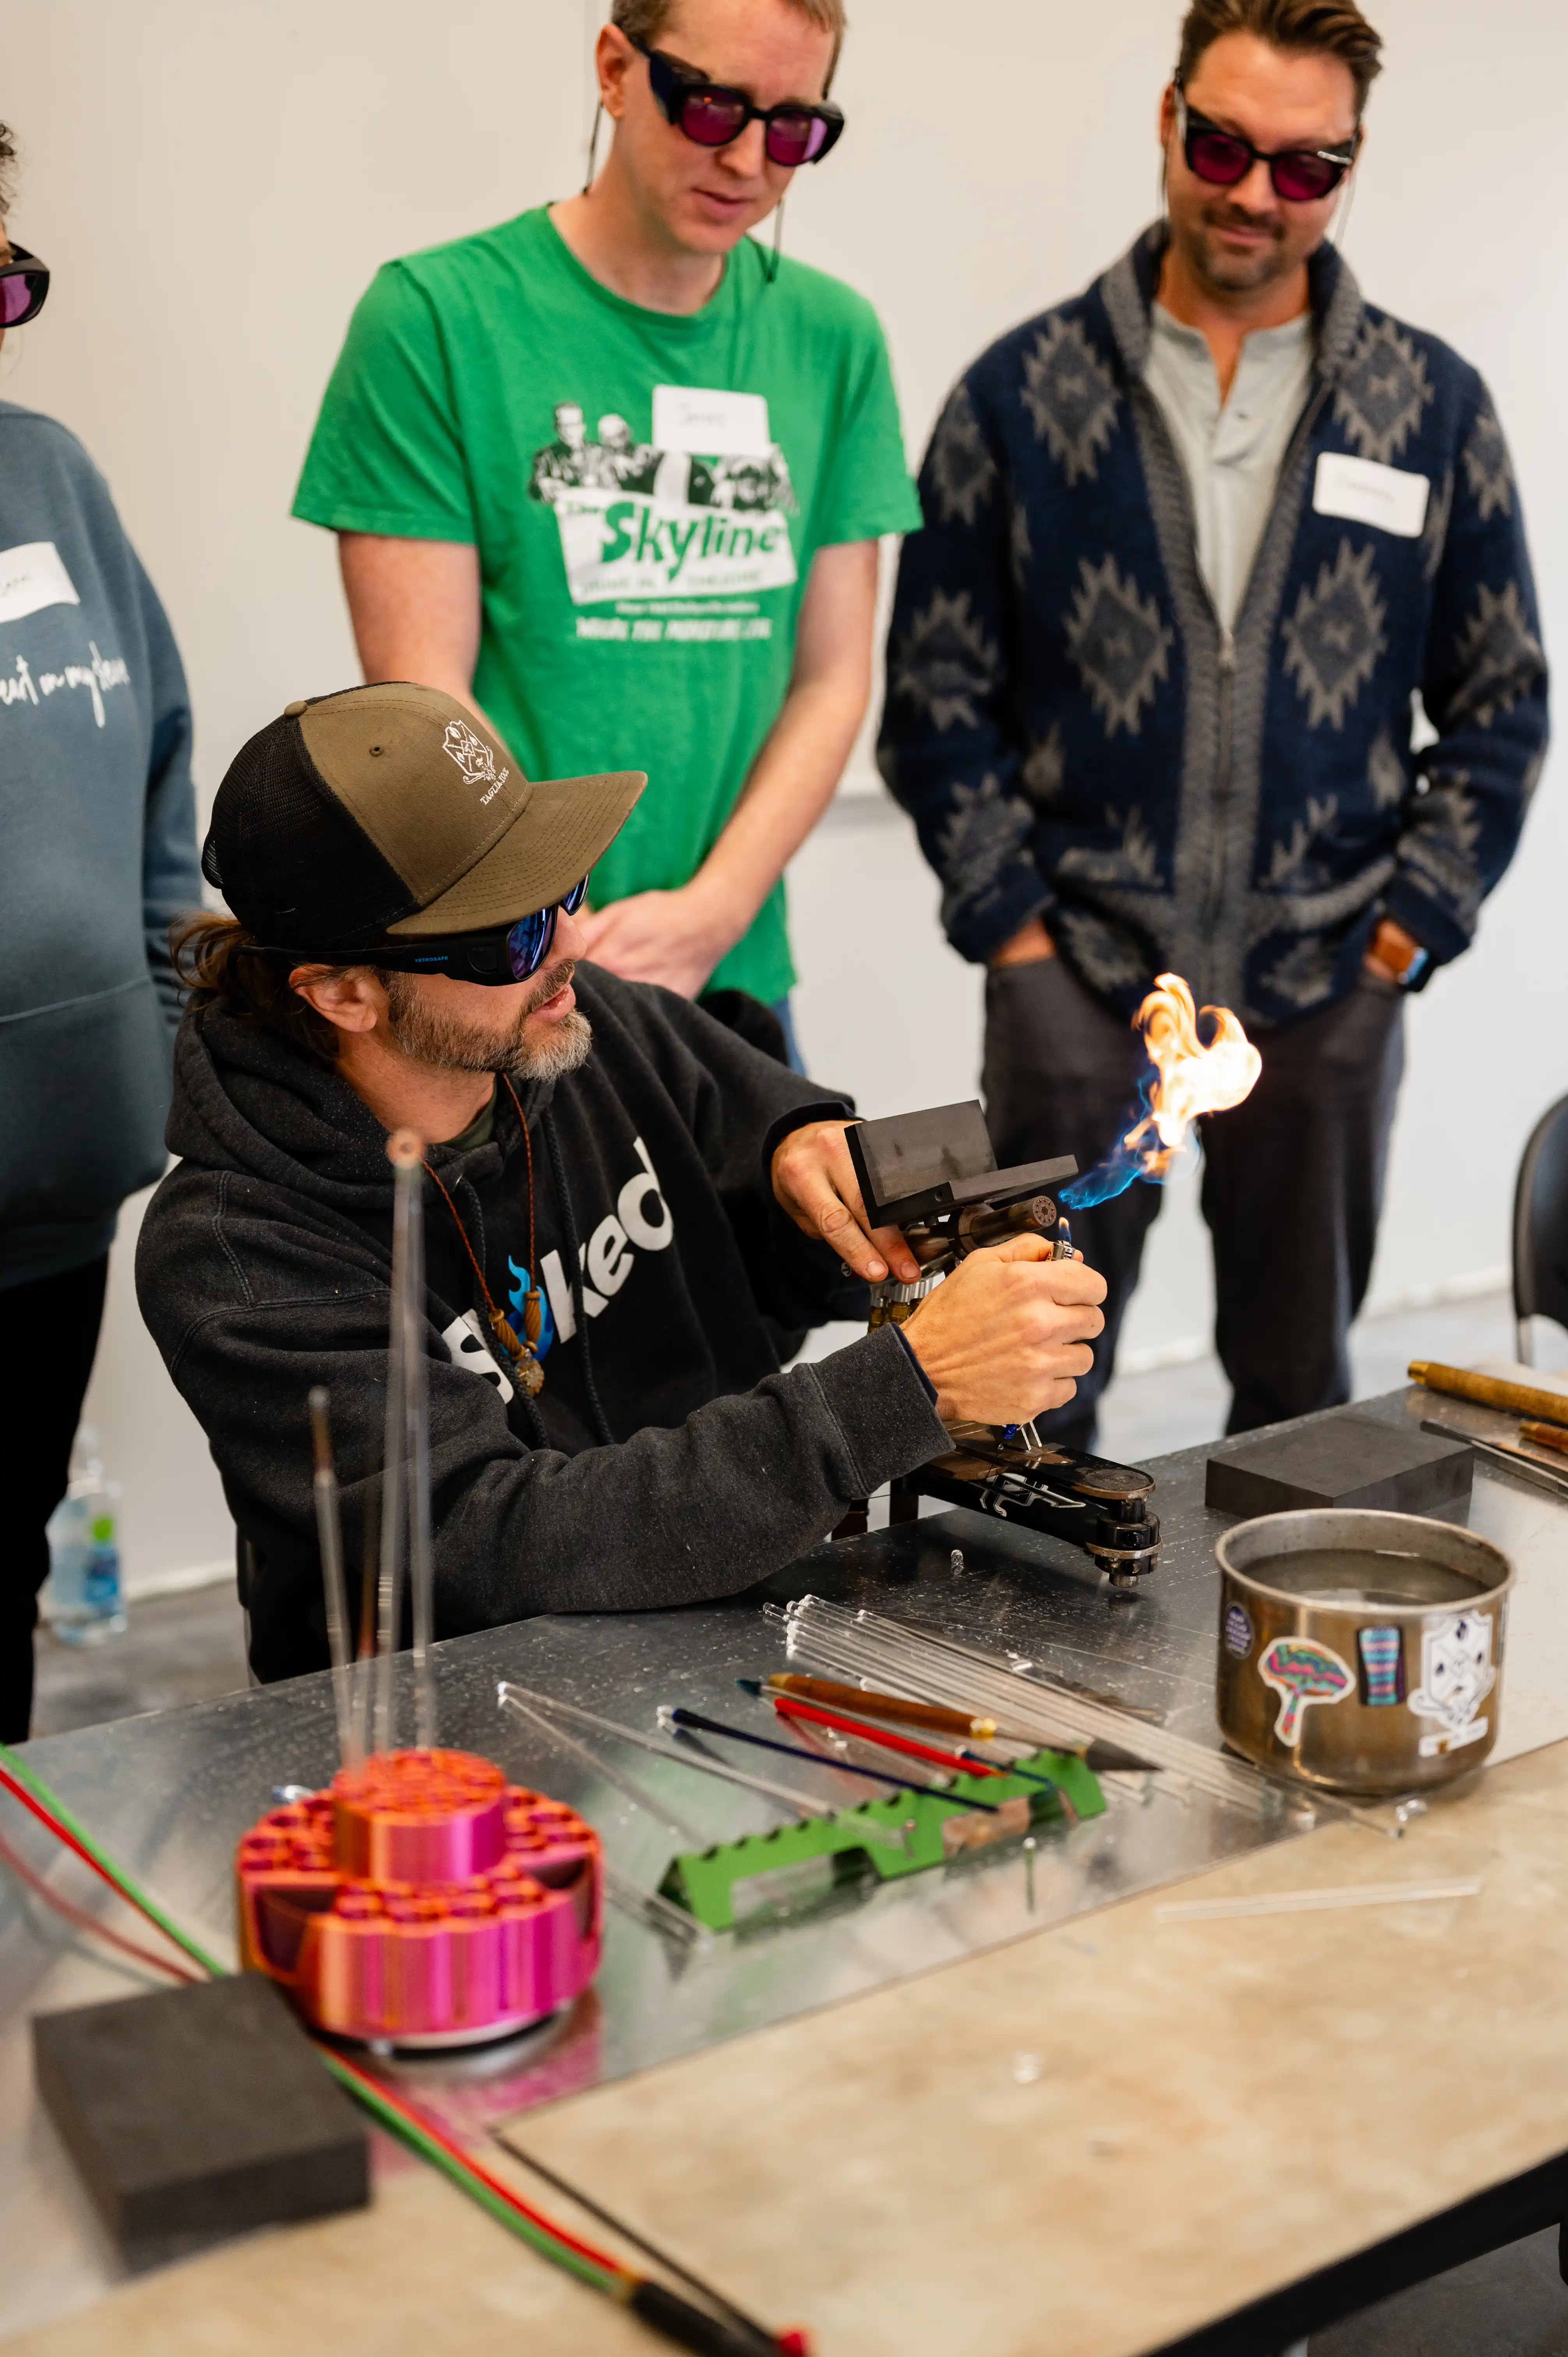 Person in a cap and sunglasses using a blowtorch to shape an object at a glassblowing workshop while onlookers watch.